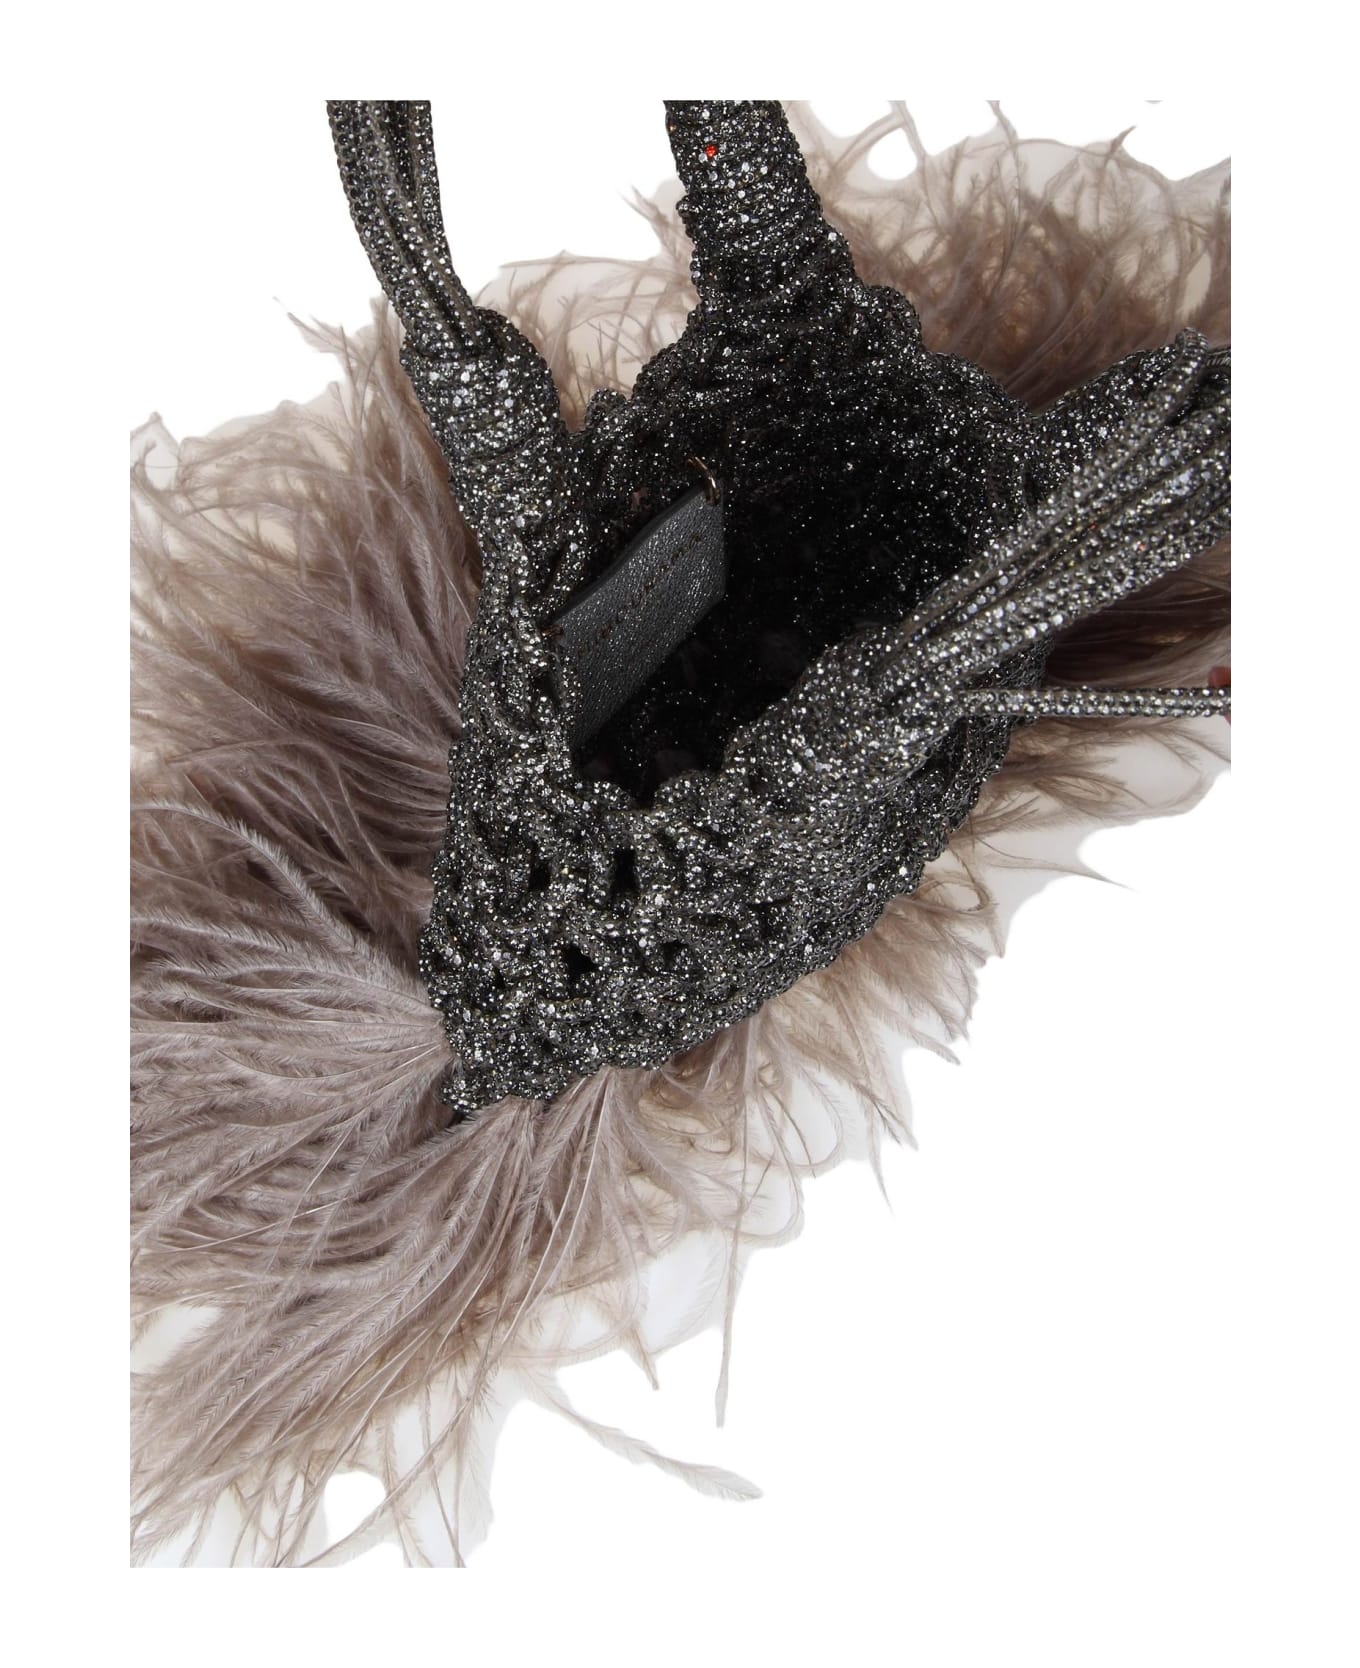 Hibourama Jewel Bag Woven With Ostrich Feathers - Black